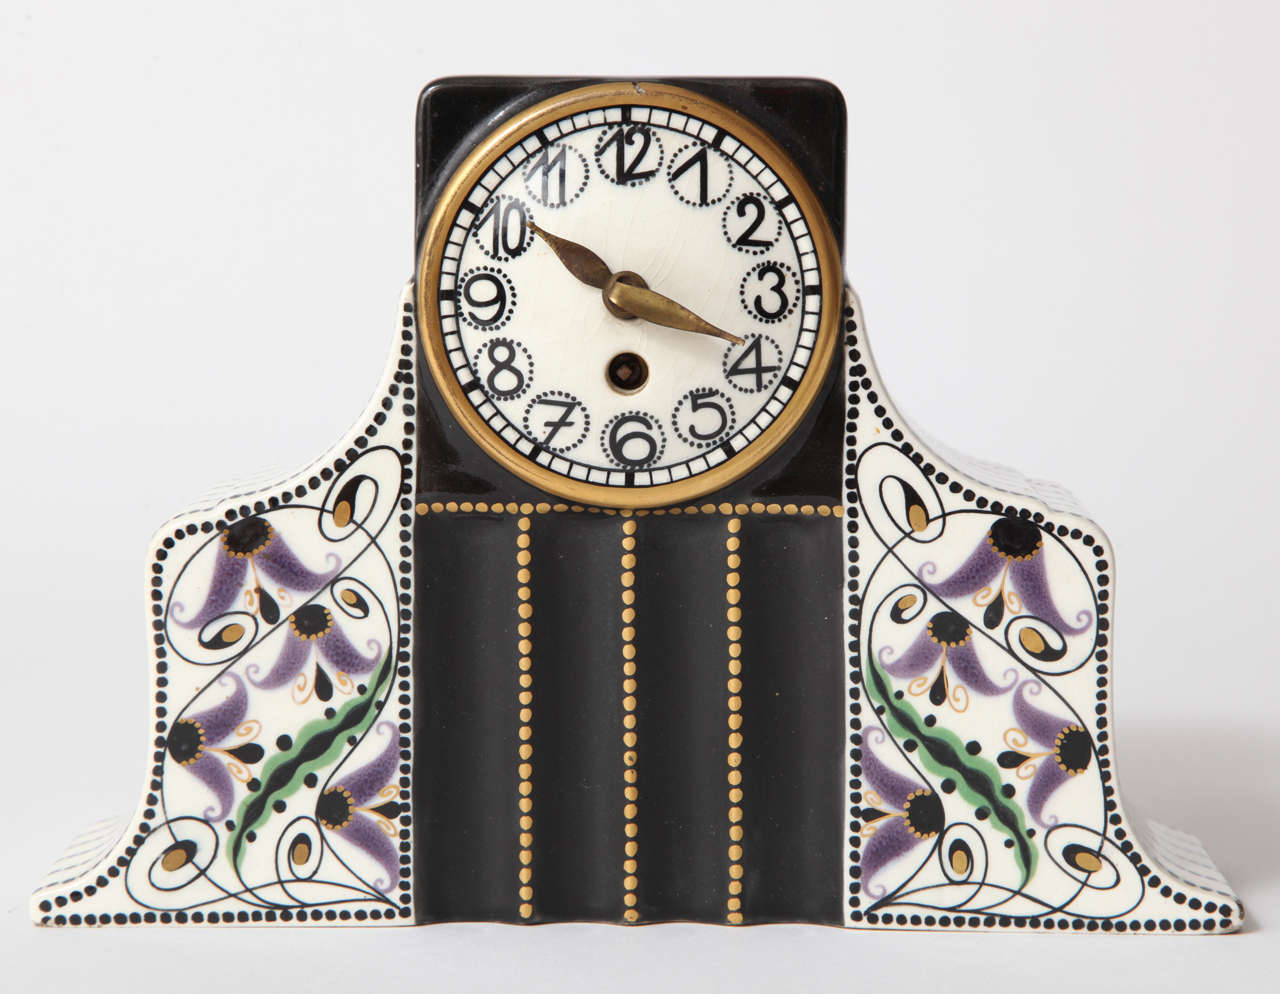 A hand-painted and glazed earthenware Serapis Wahliss clock with a highly stylized multi-colored floral design against a black, white and gold background.